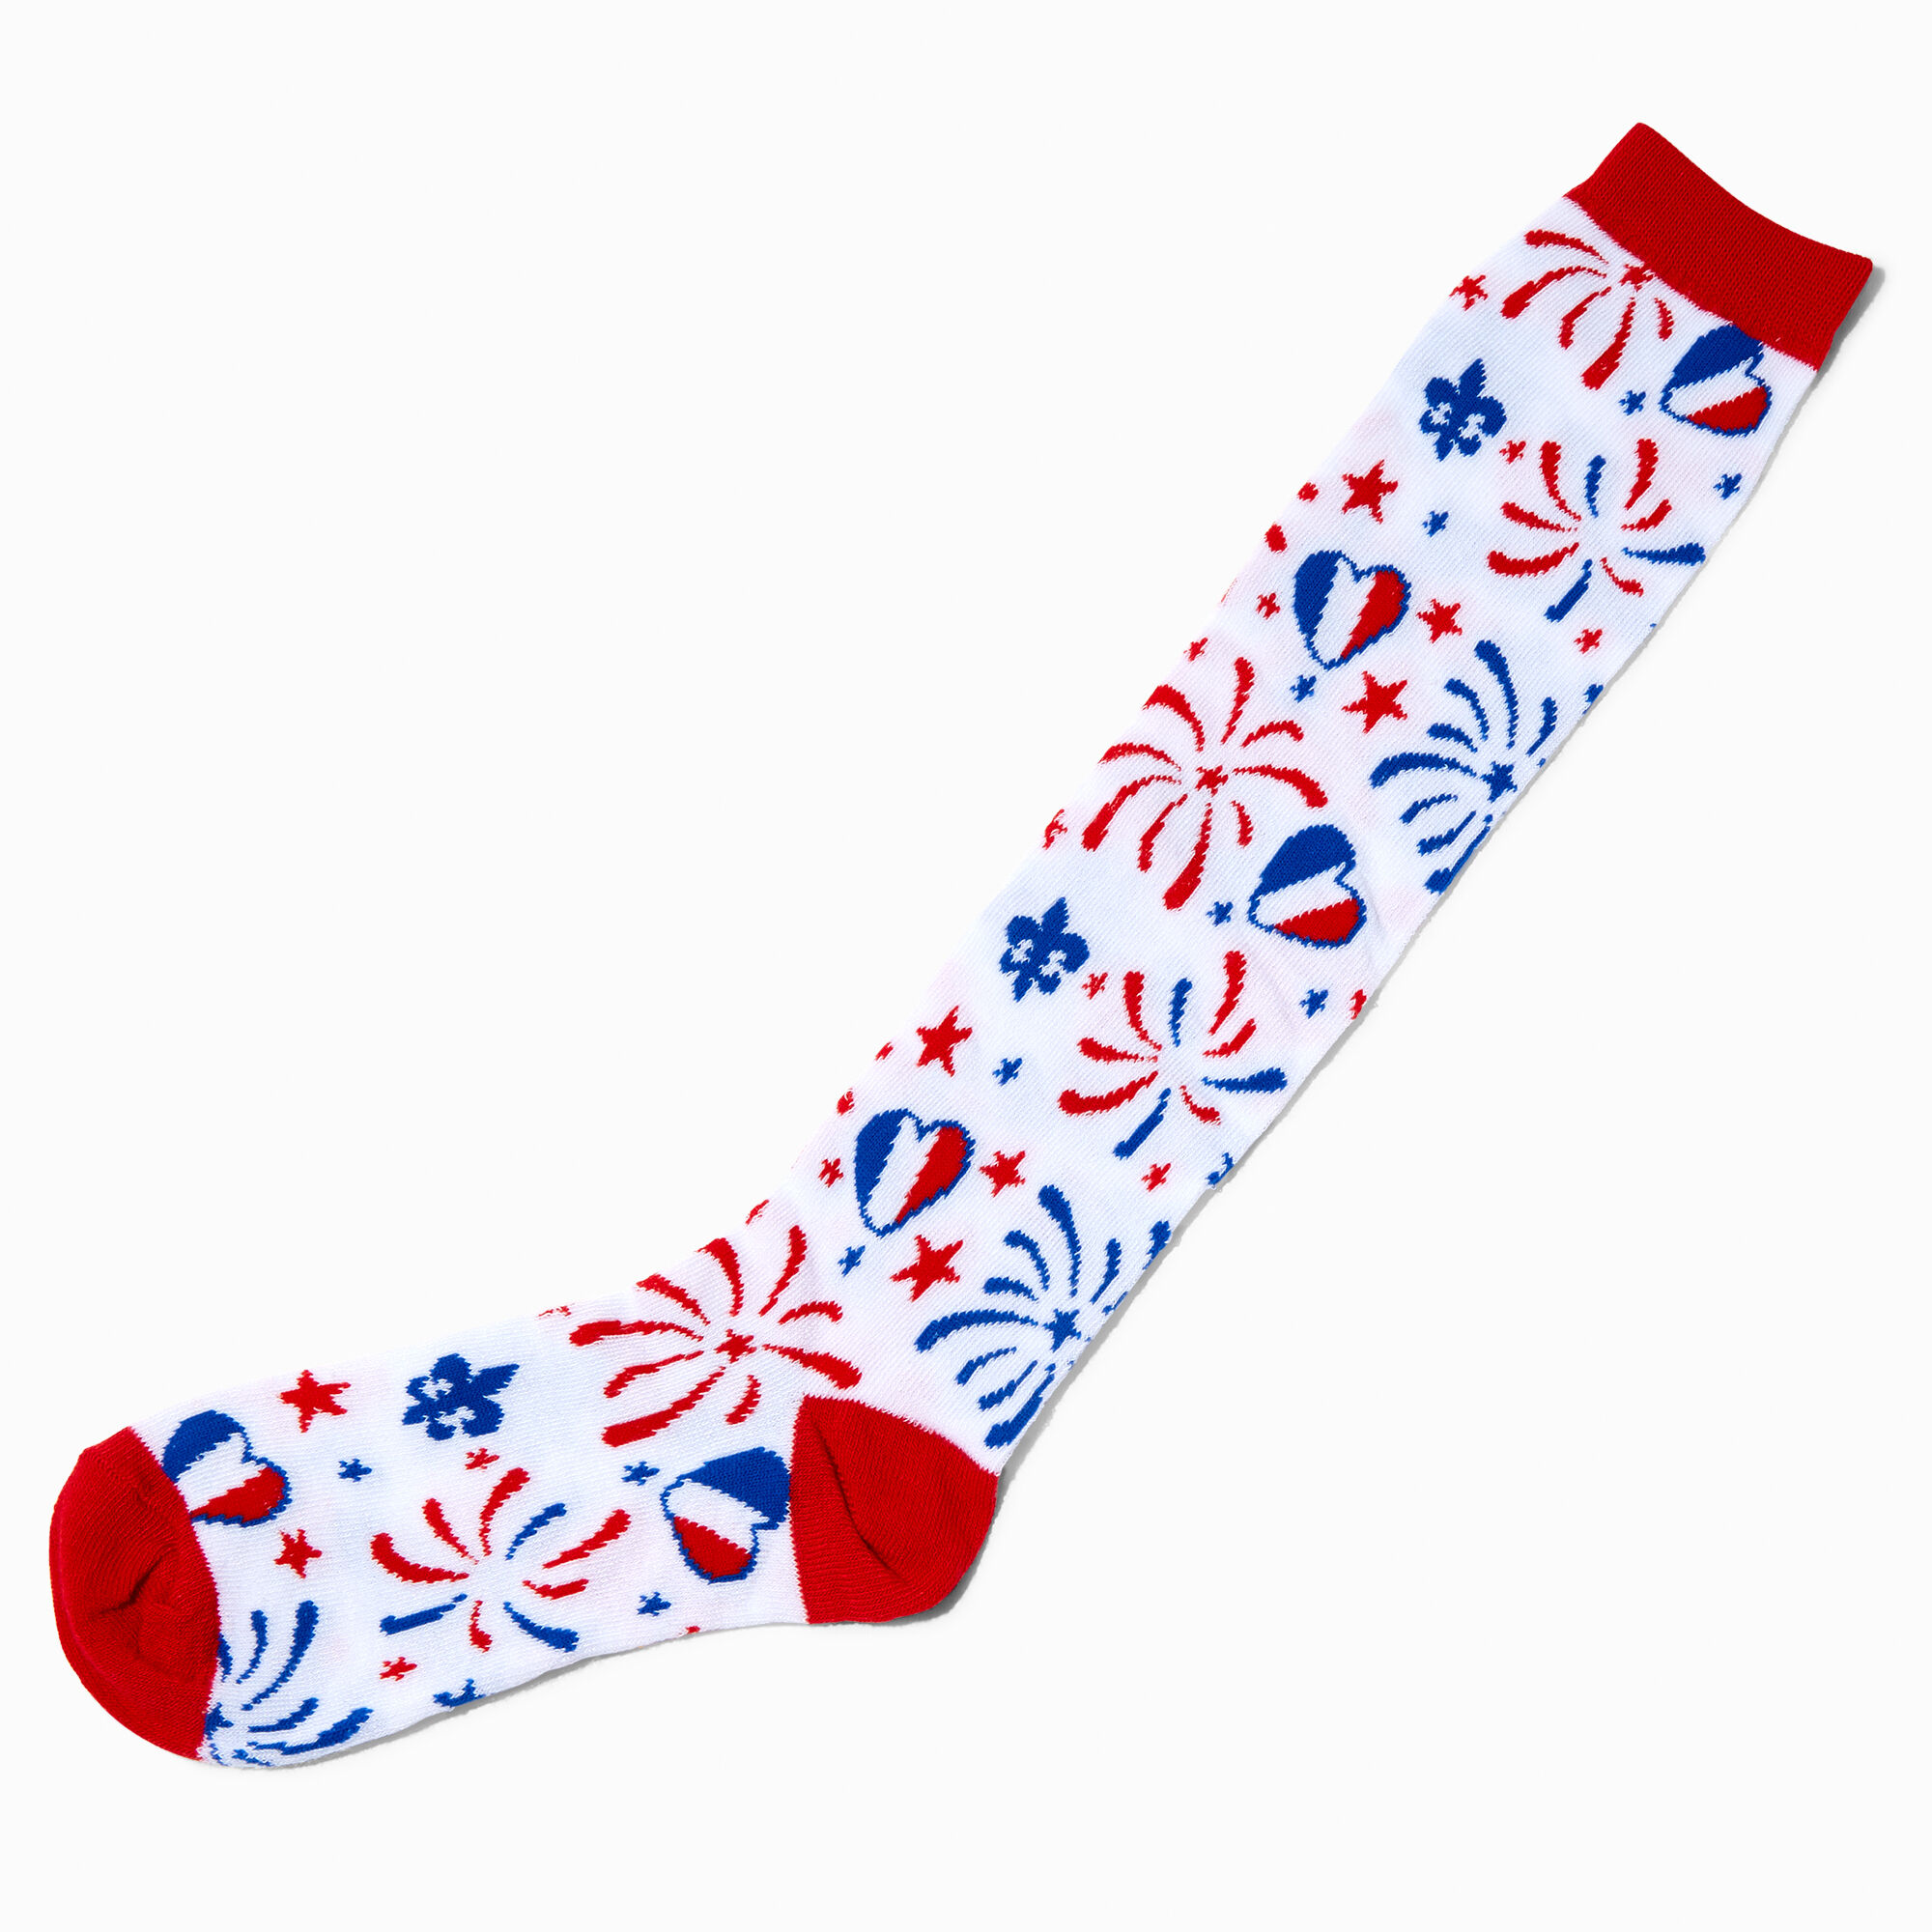 View Claires Bastille Day Knee High Socks information